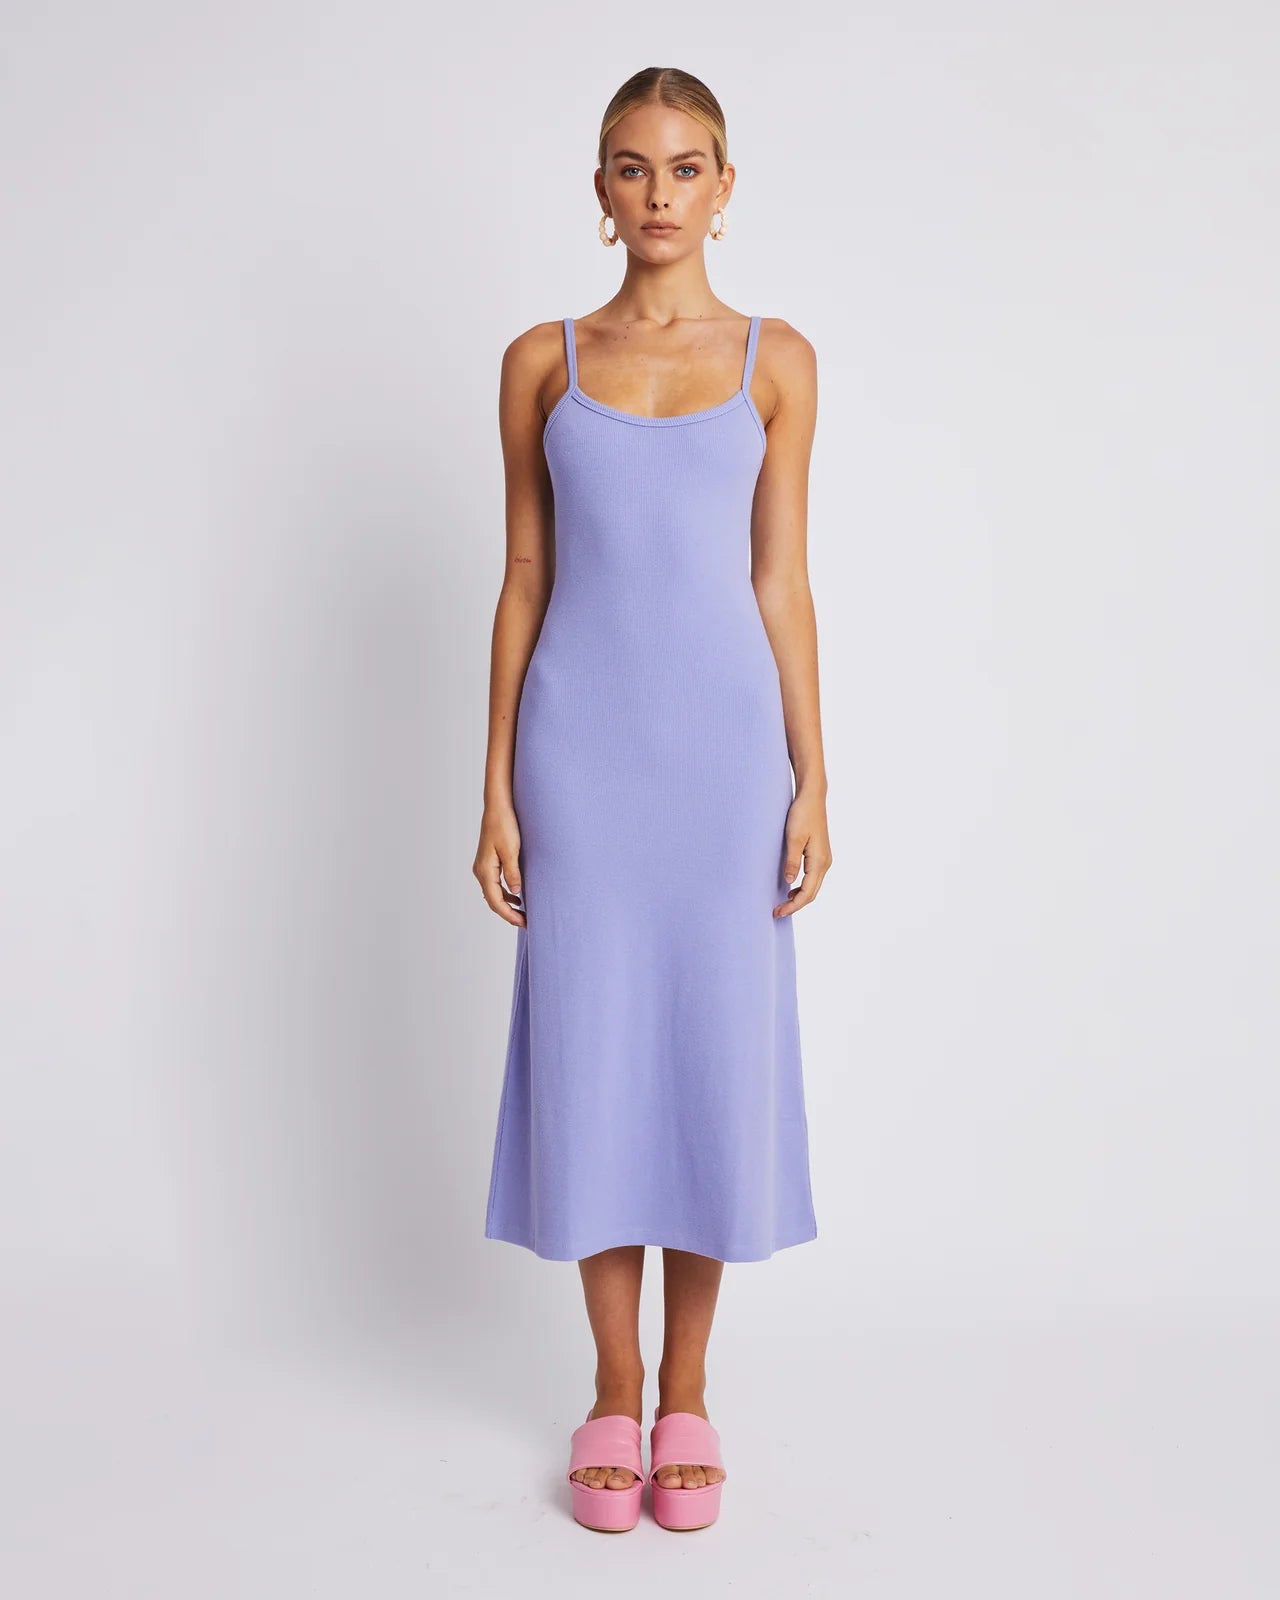 Look cool and feel comfortable in this A Line Midi Dress. With its thick ribbed cotton, it's form shaping, while keeping you comfortable. The midi length makes it perfect for any occasion. Get ready to look great in lilac.